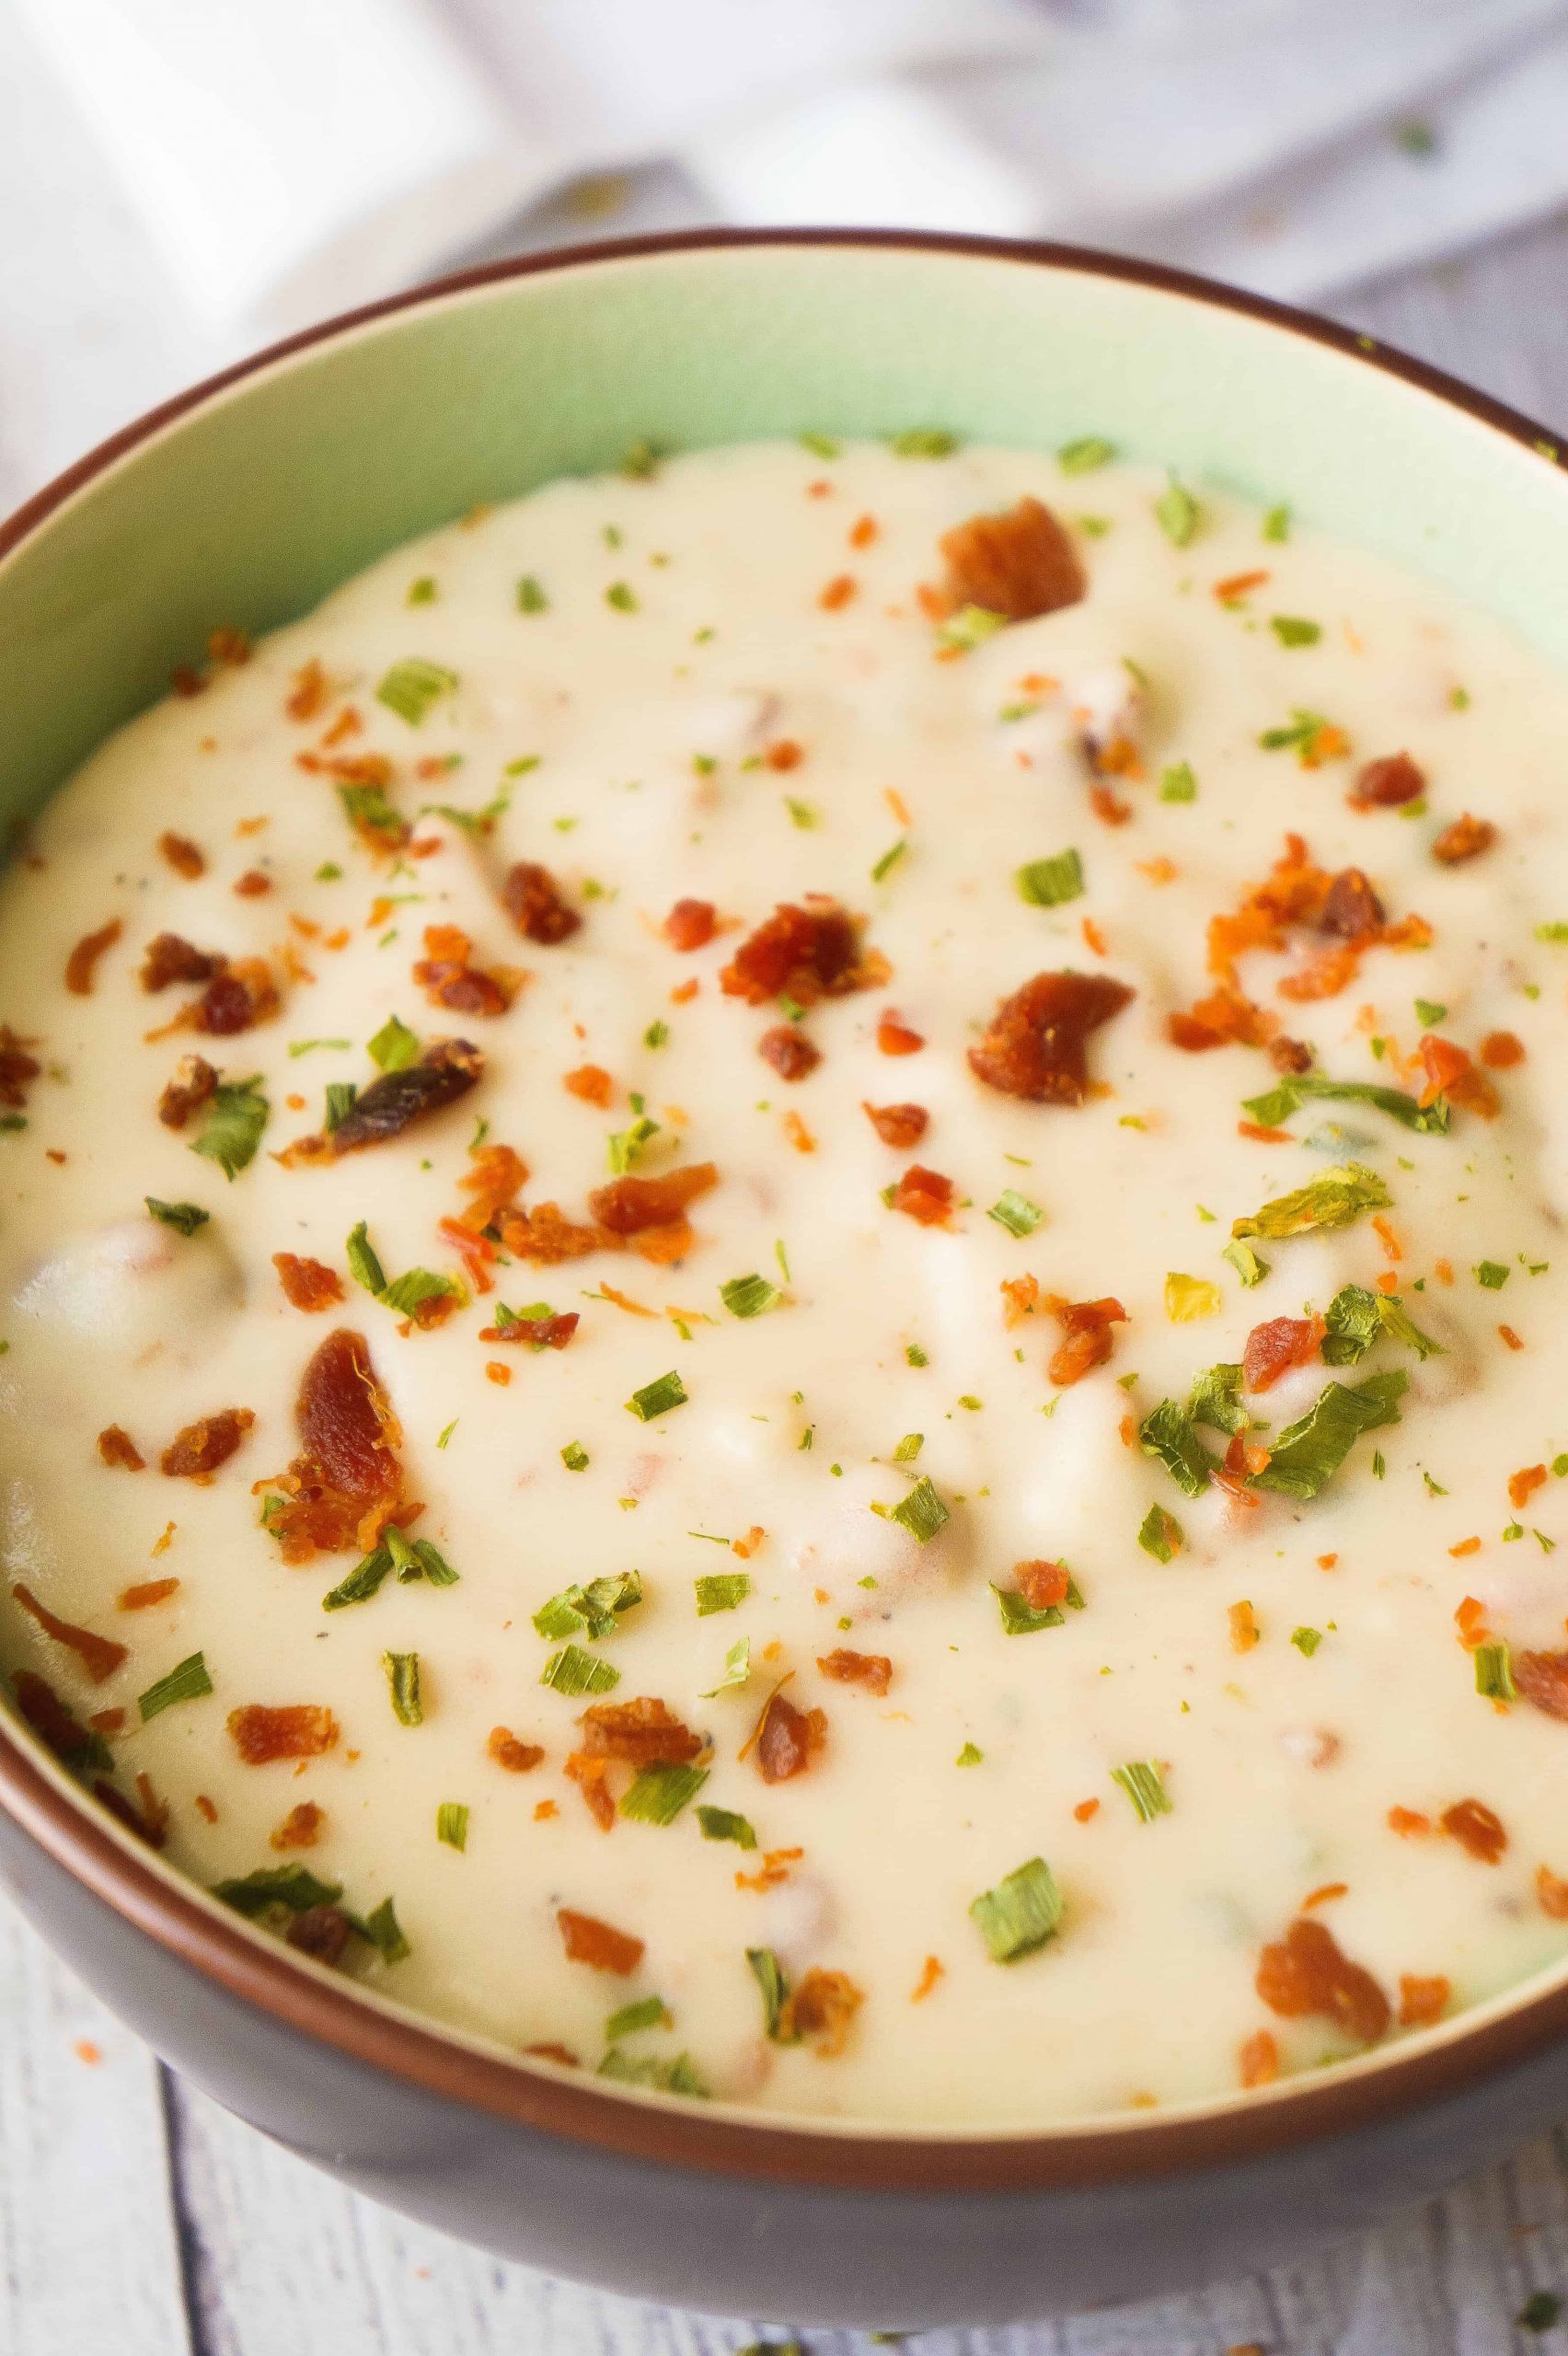 Cream Cheese Potato Soup
 Cream Cheese Potato Bacon Soup This is Not Diet Food